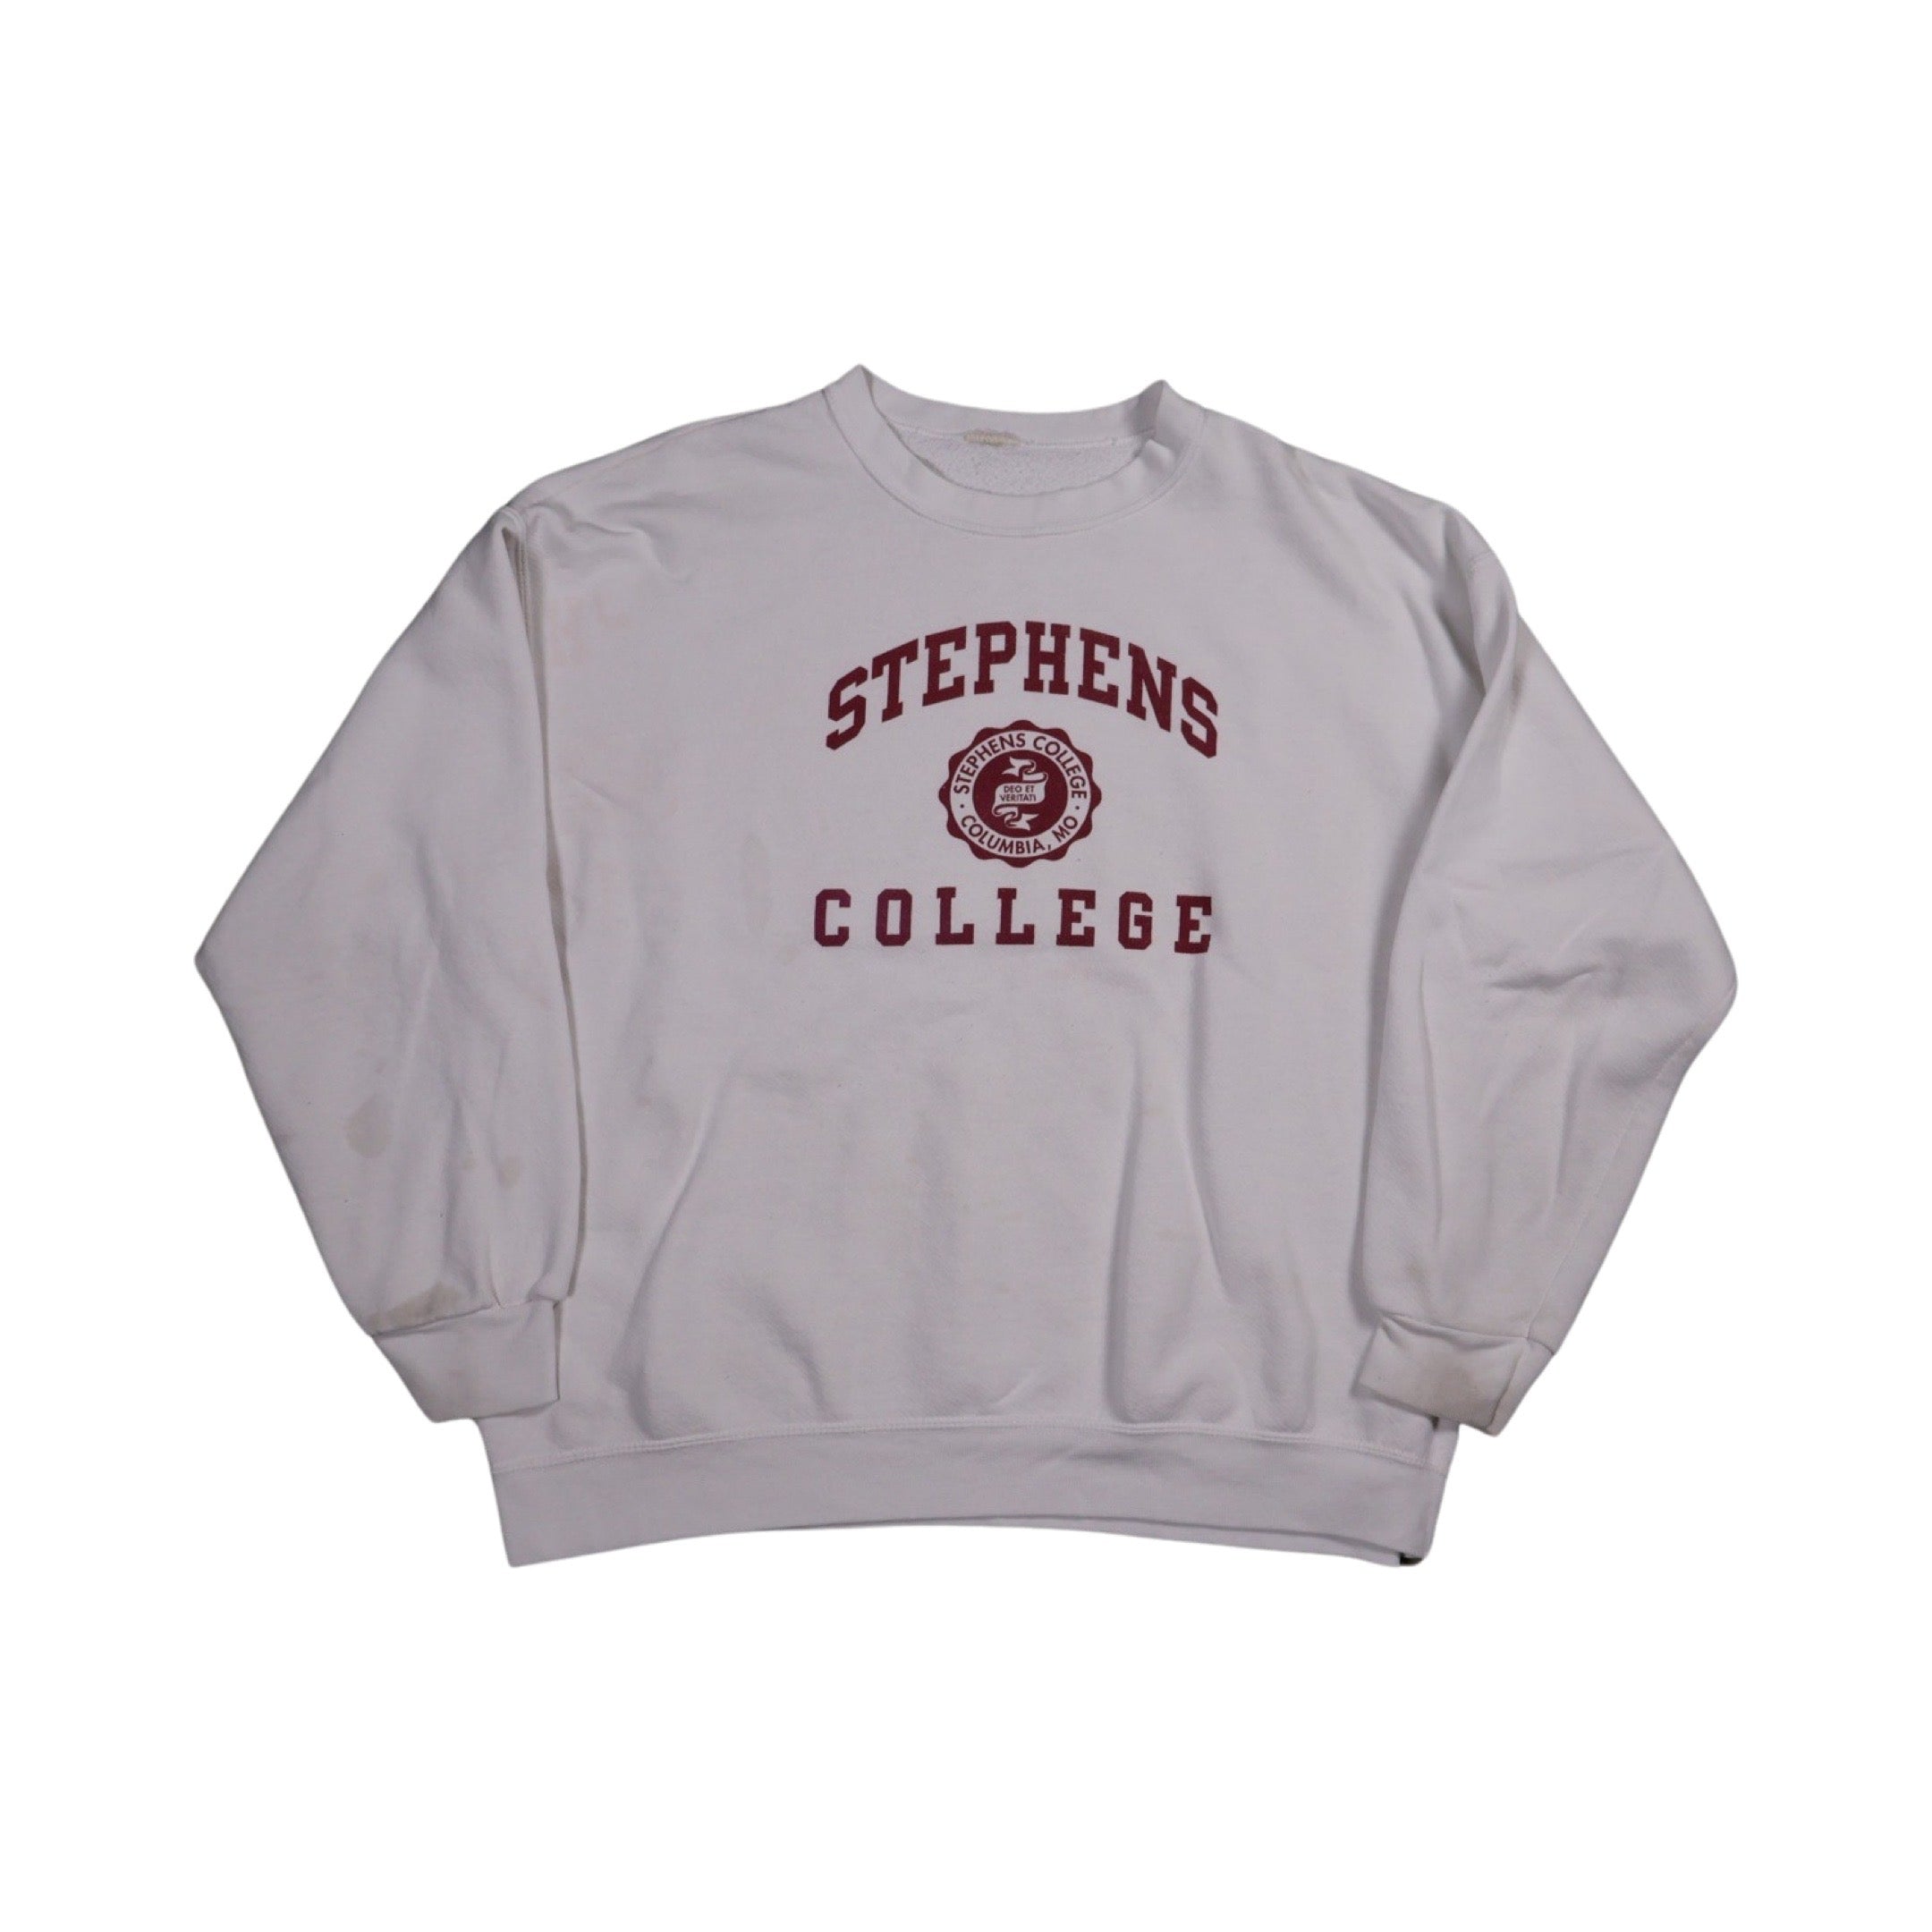 Stephens College 90s Sweater (XL)